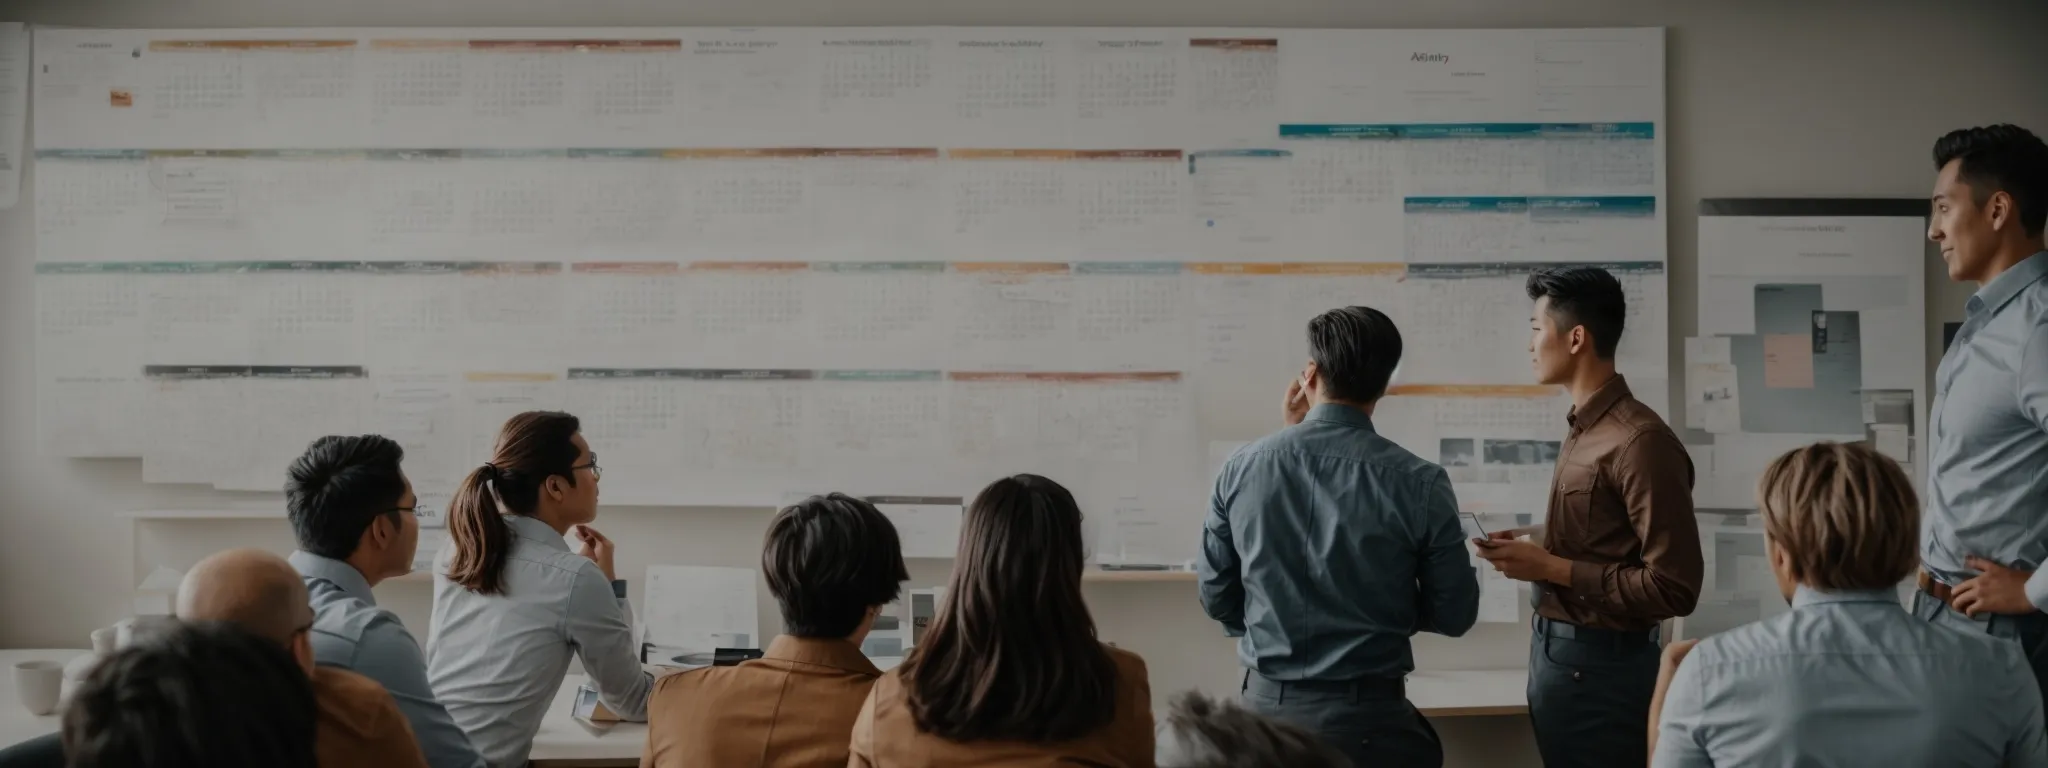 a team strategizes over a large calendar on the wall, marking important dates for combined seo and social media campaigns.